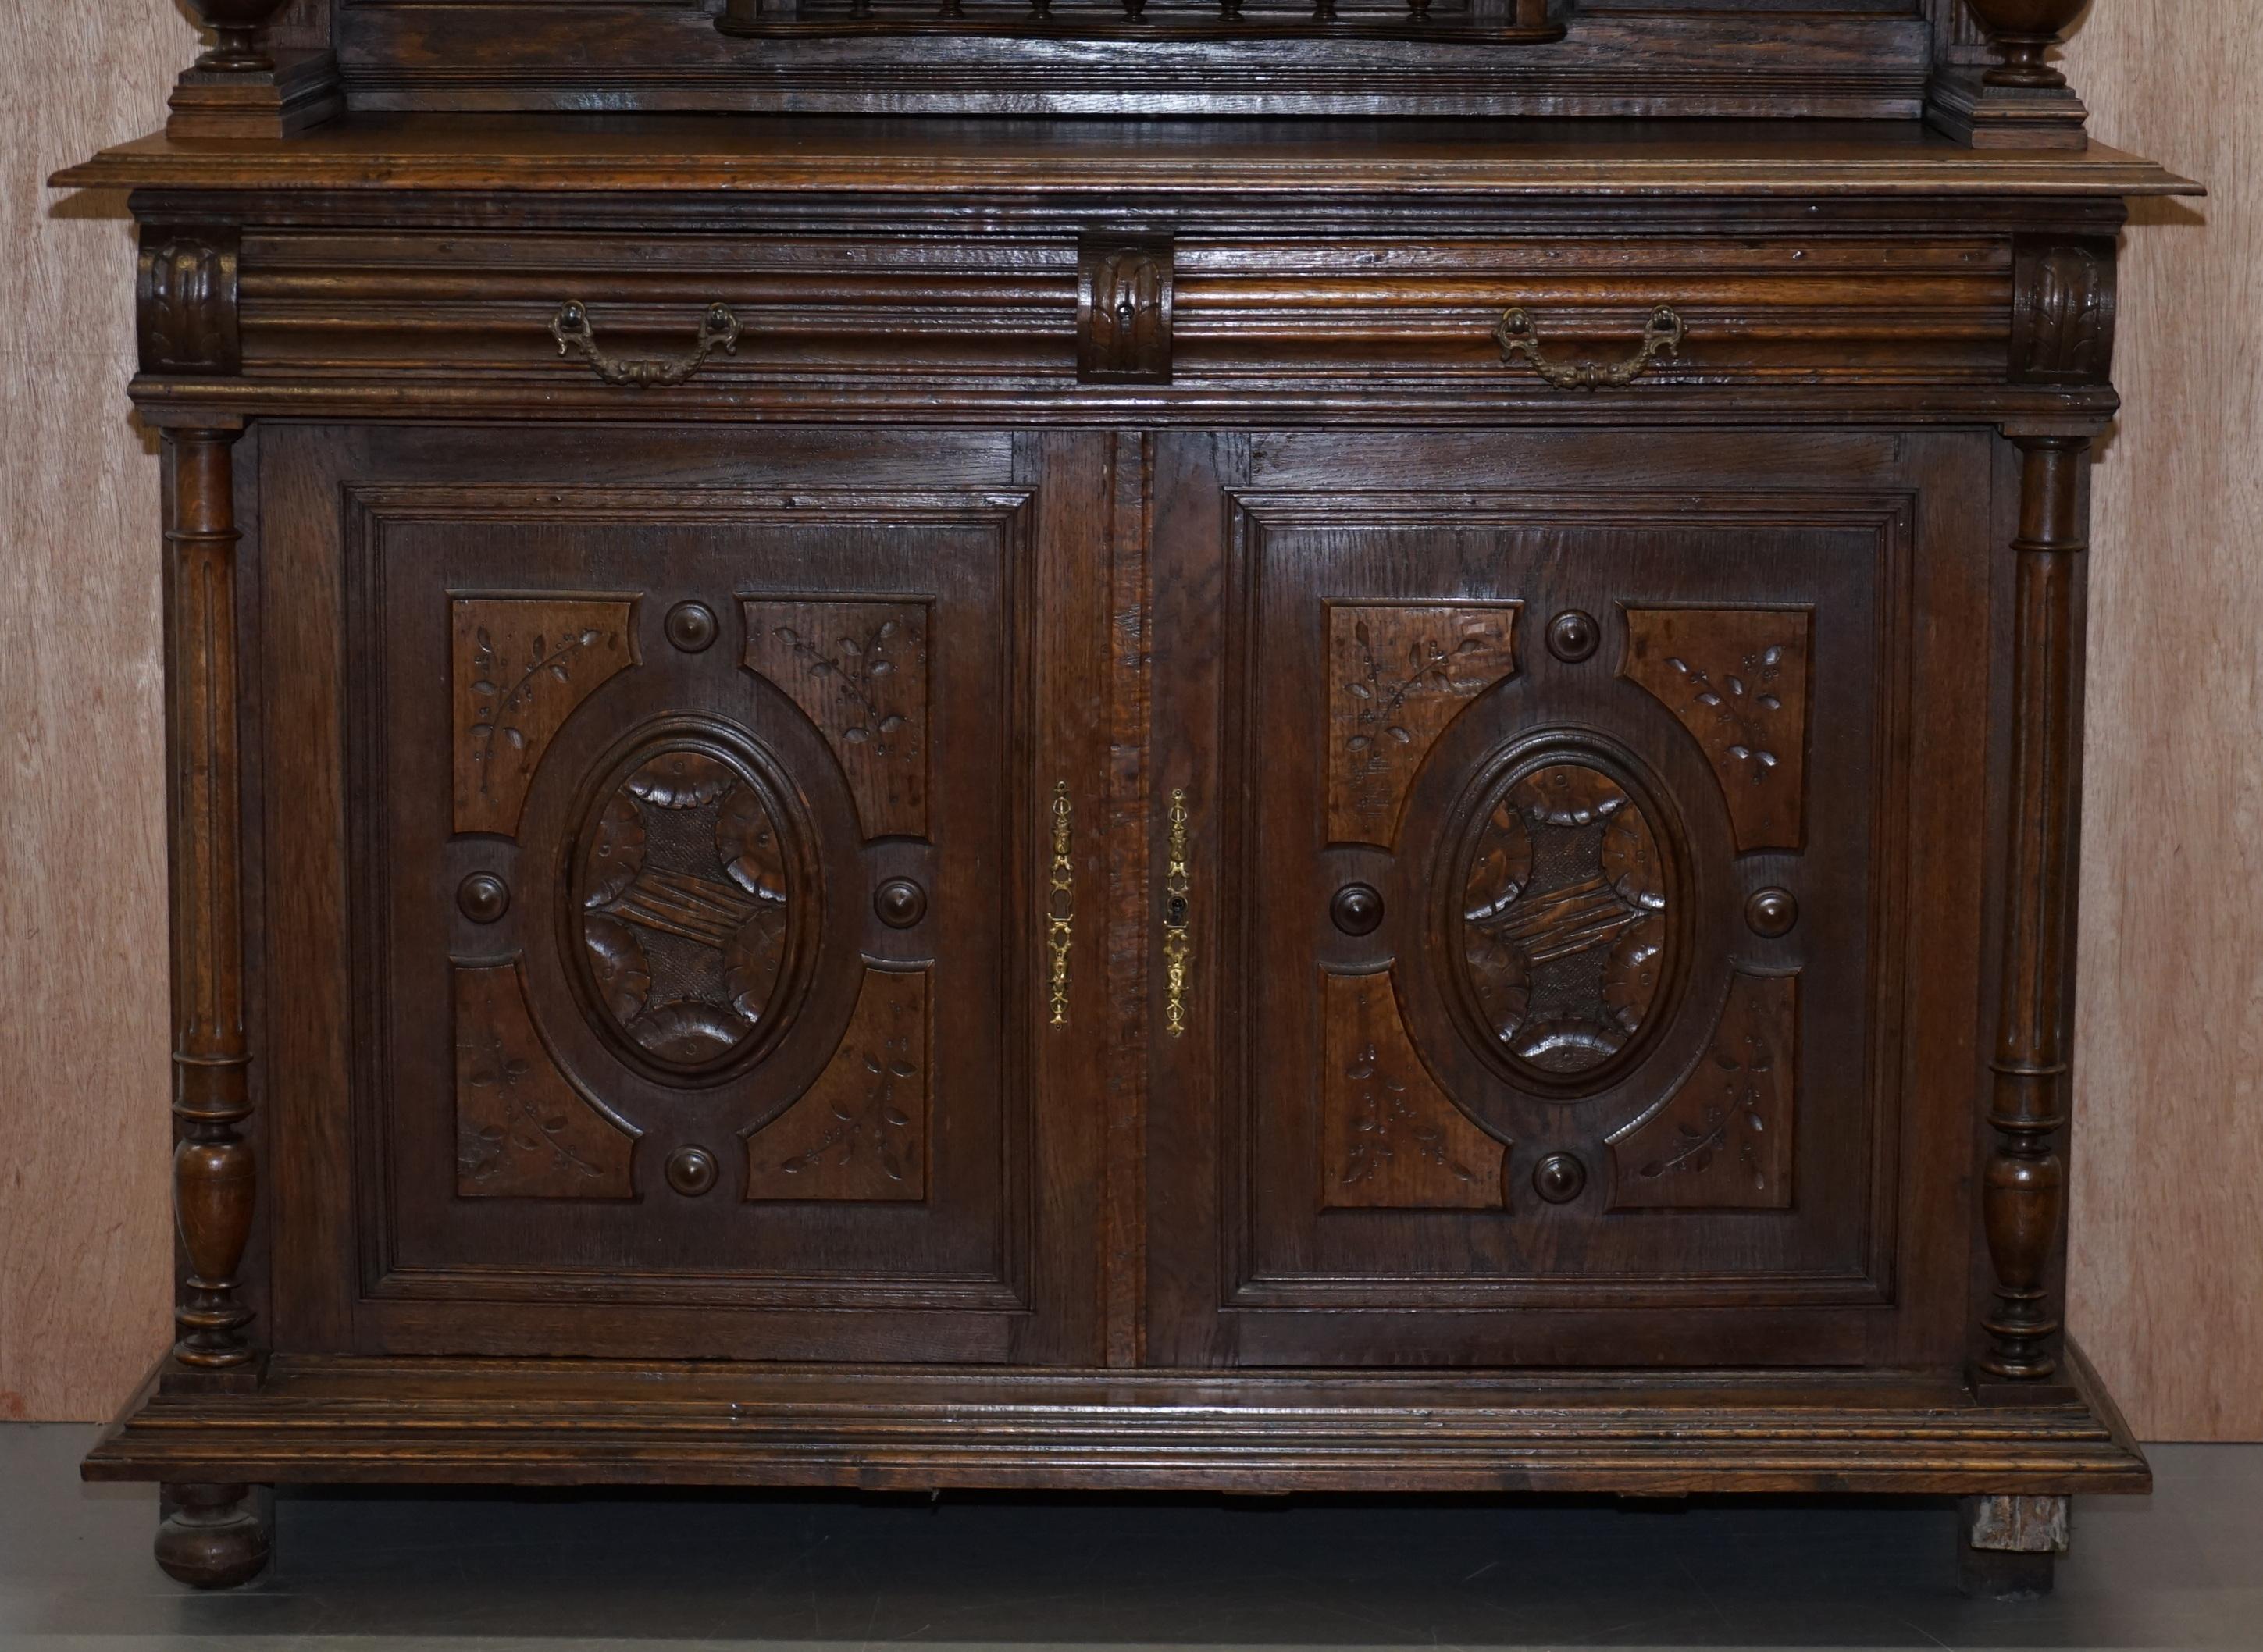 We are delighted to offer for sale this stunning original early 19th century hand carved Dutch cupboard

A very good looking and well made piece, ornately carved and nicely detailed throughout, ideally suited for general household storage, all the